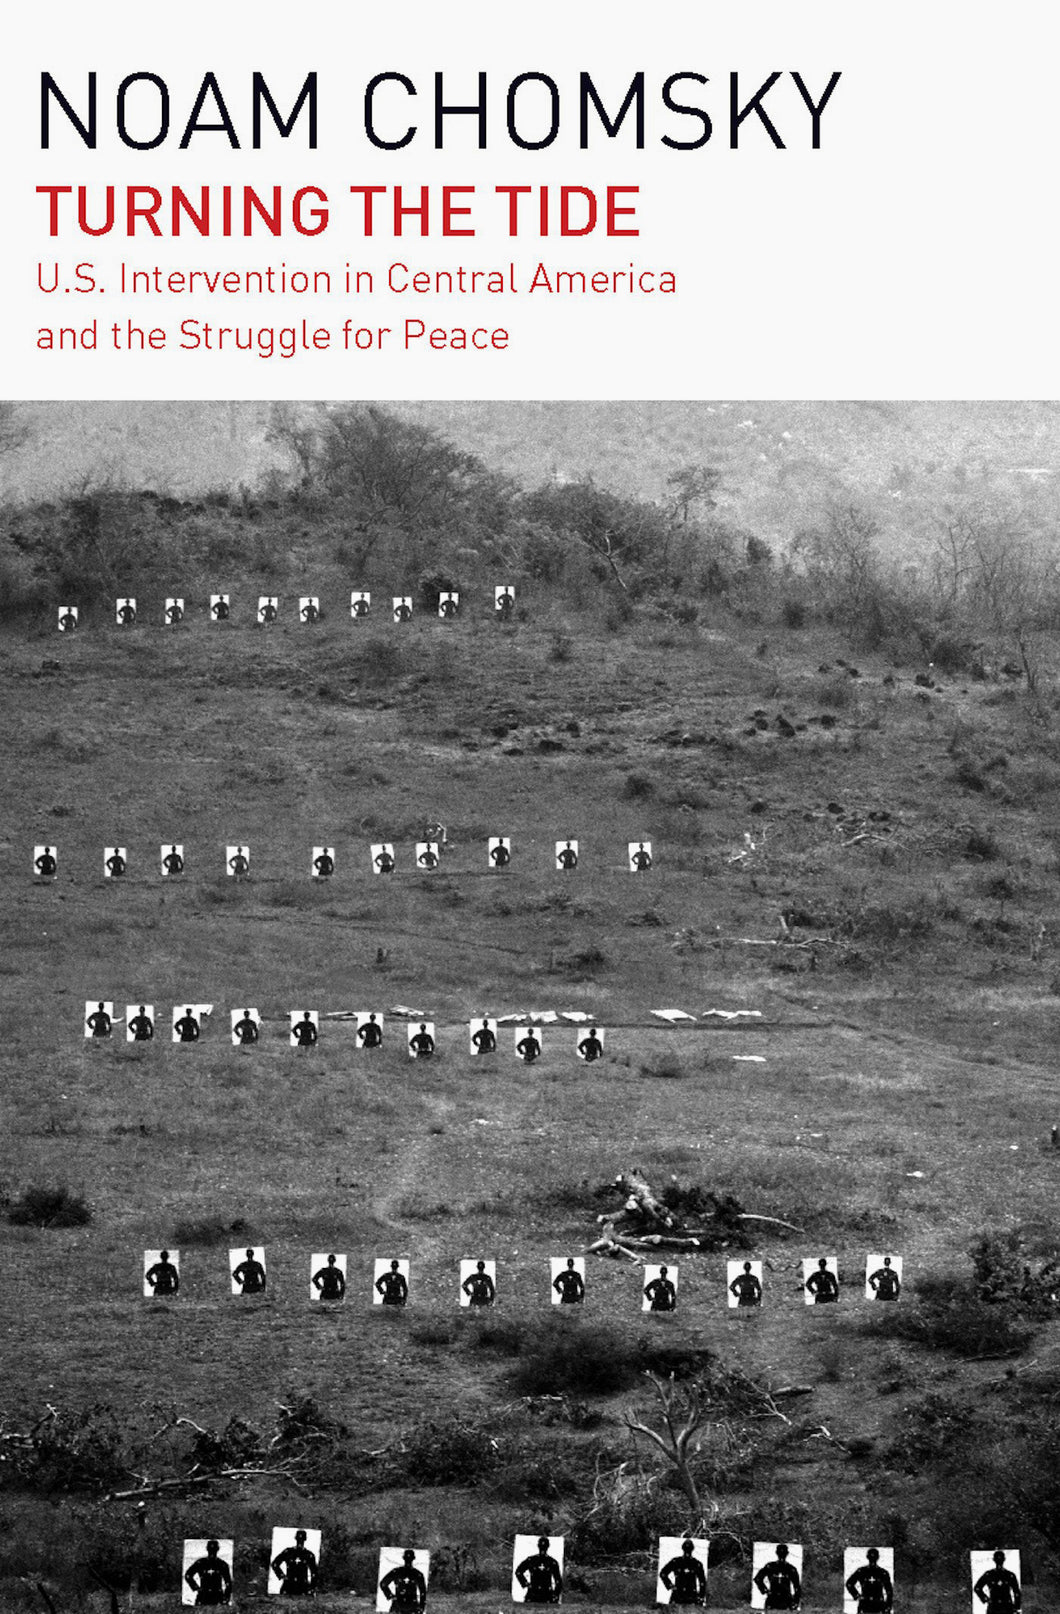 Turning the Tide: U.S. Intervention in Central America and the Struggle for Peace by Noam Chomsky